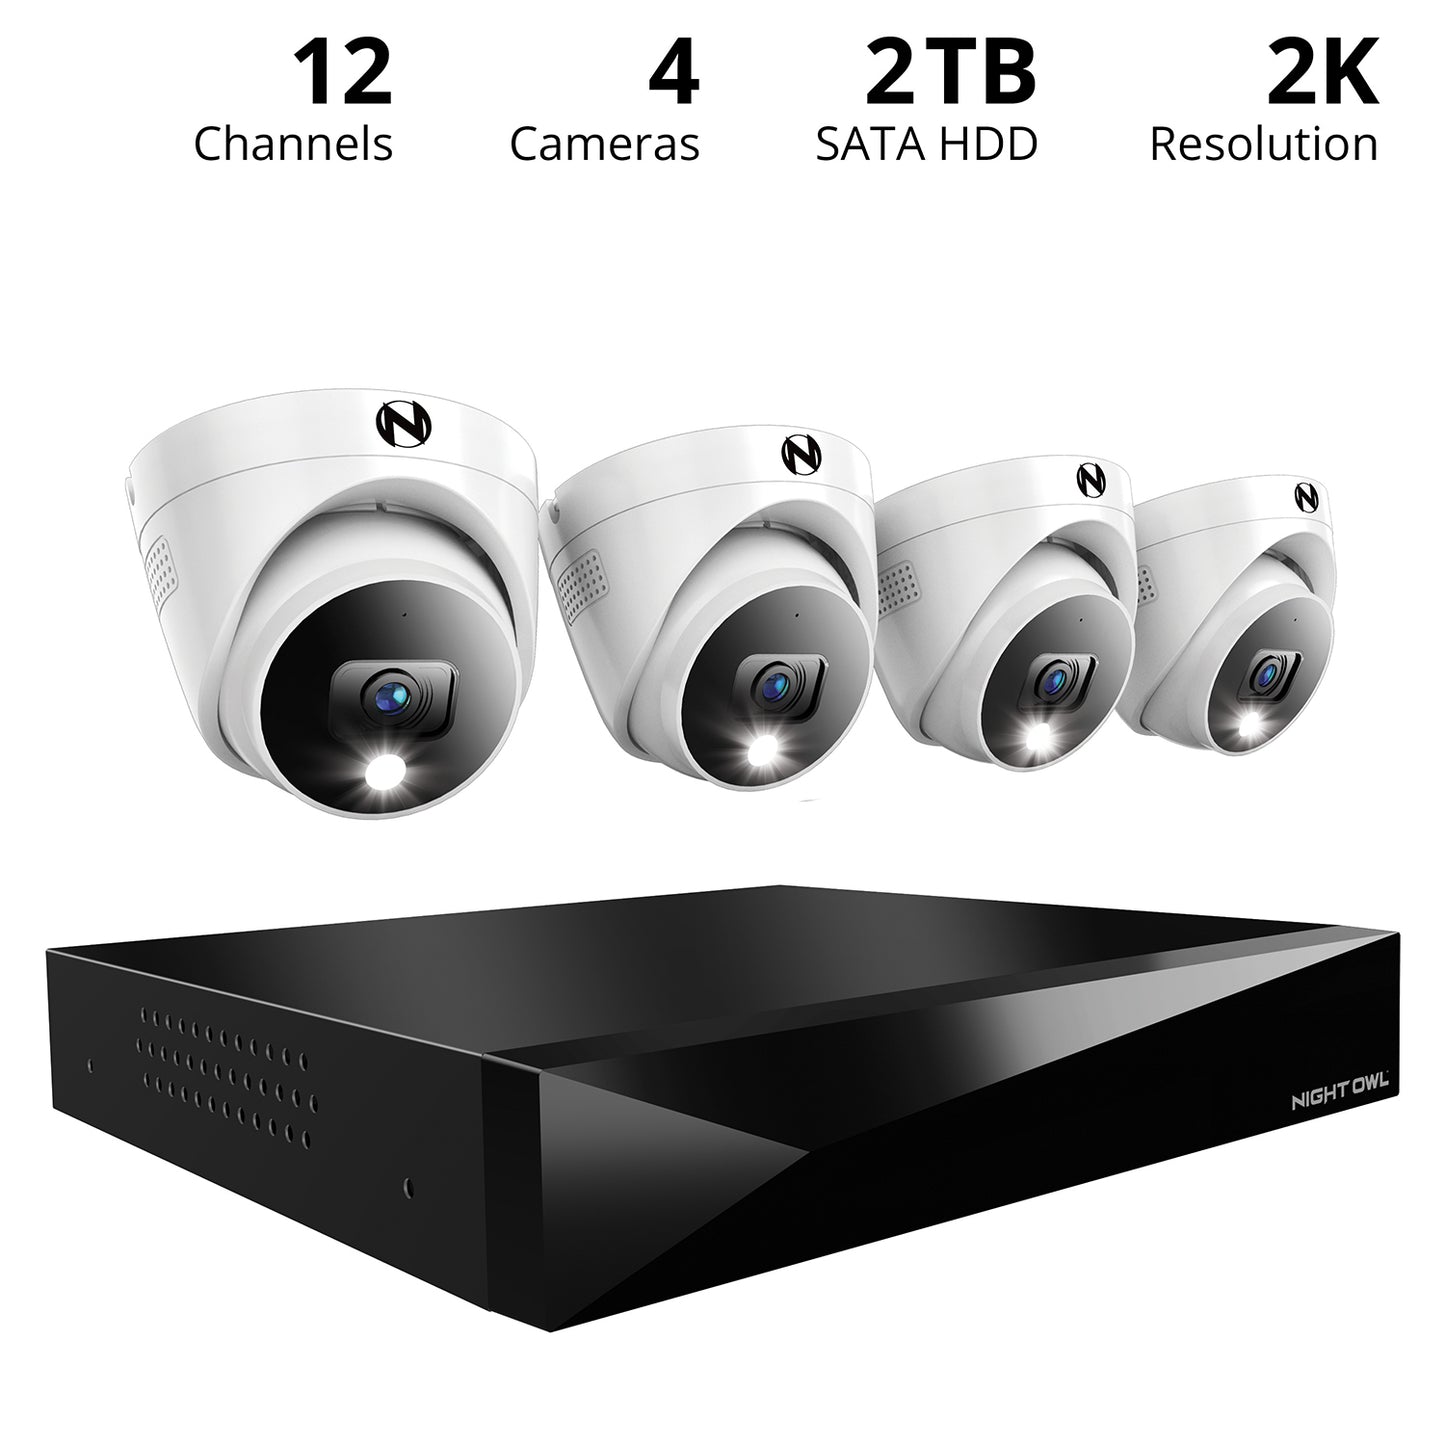 2-Way Audio 12 Channel DVR Security System with 2TB Hard Drive and 4 Wired 2K Deterrence Dome Cameras